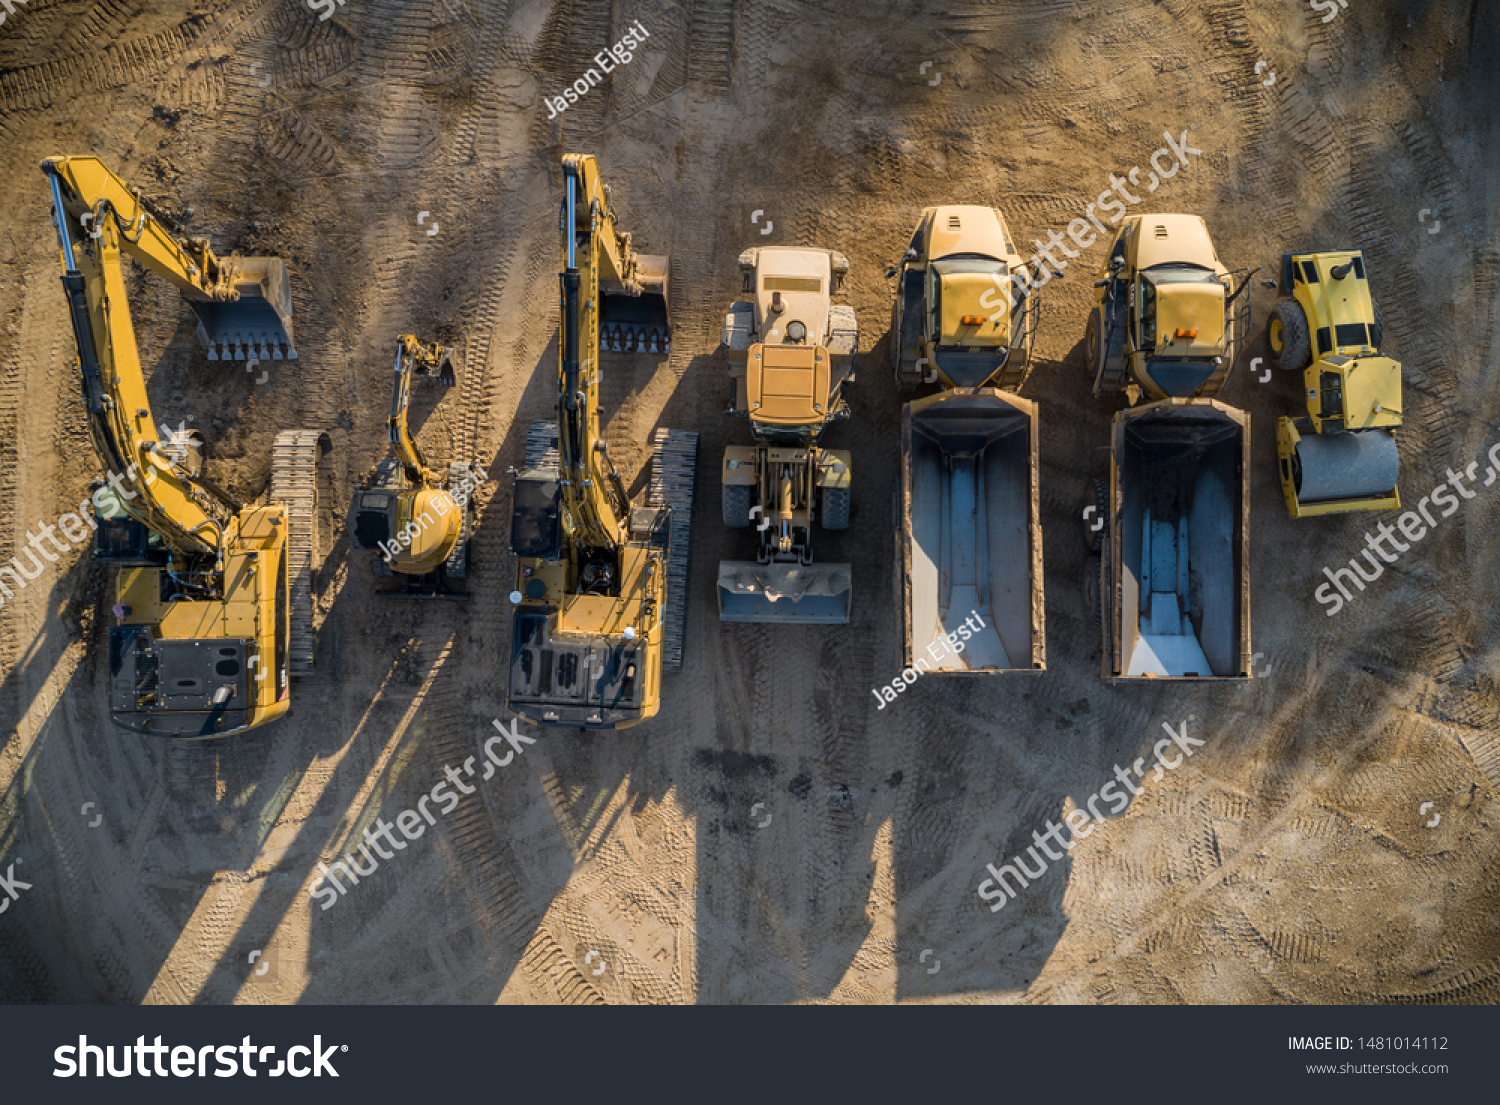 Construction dirt moving equipment lined up for the night. #1481014112